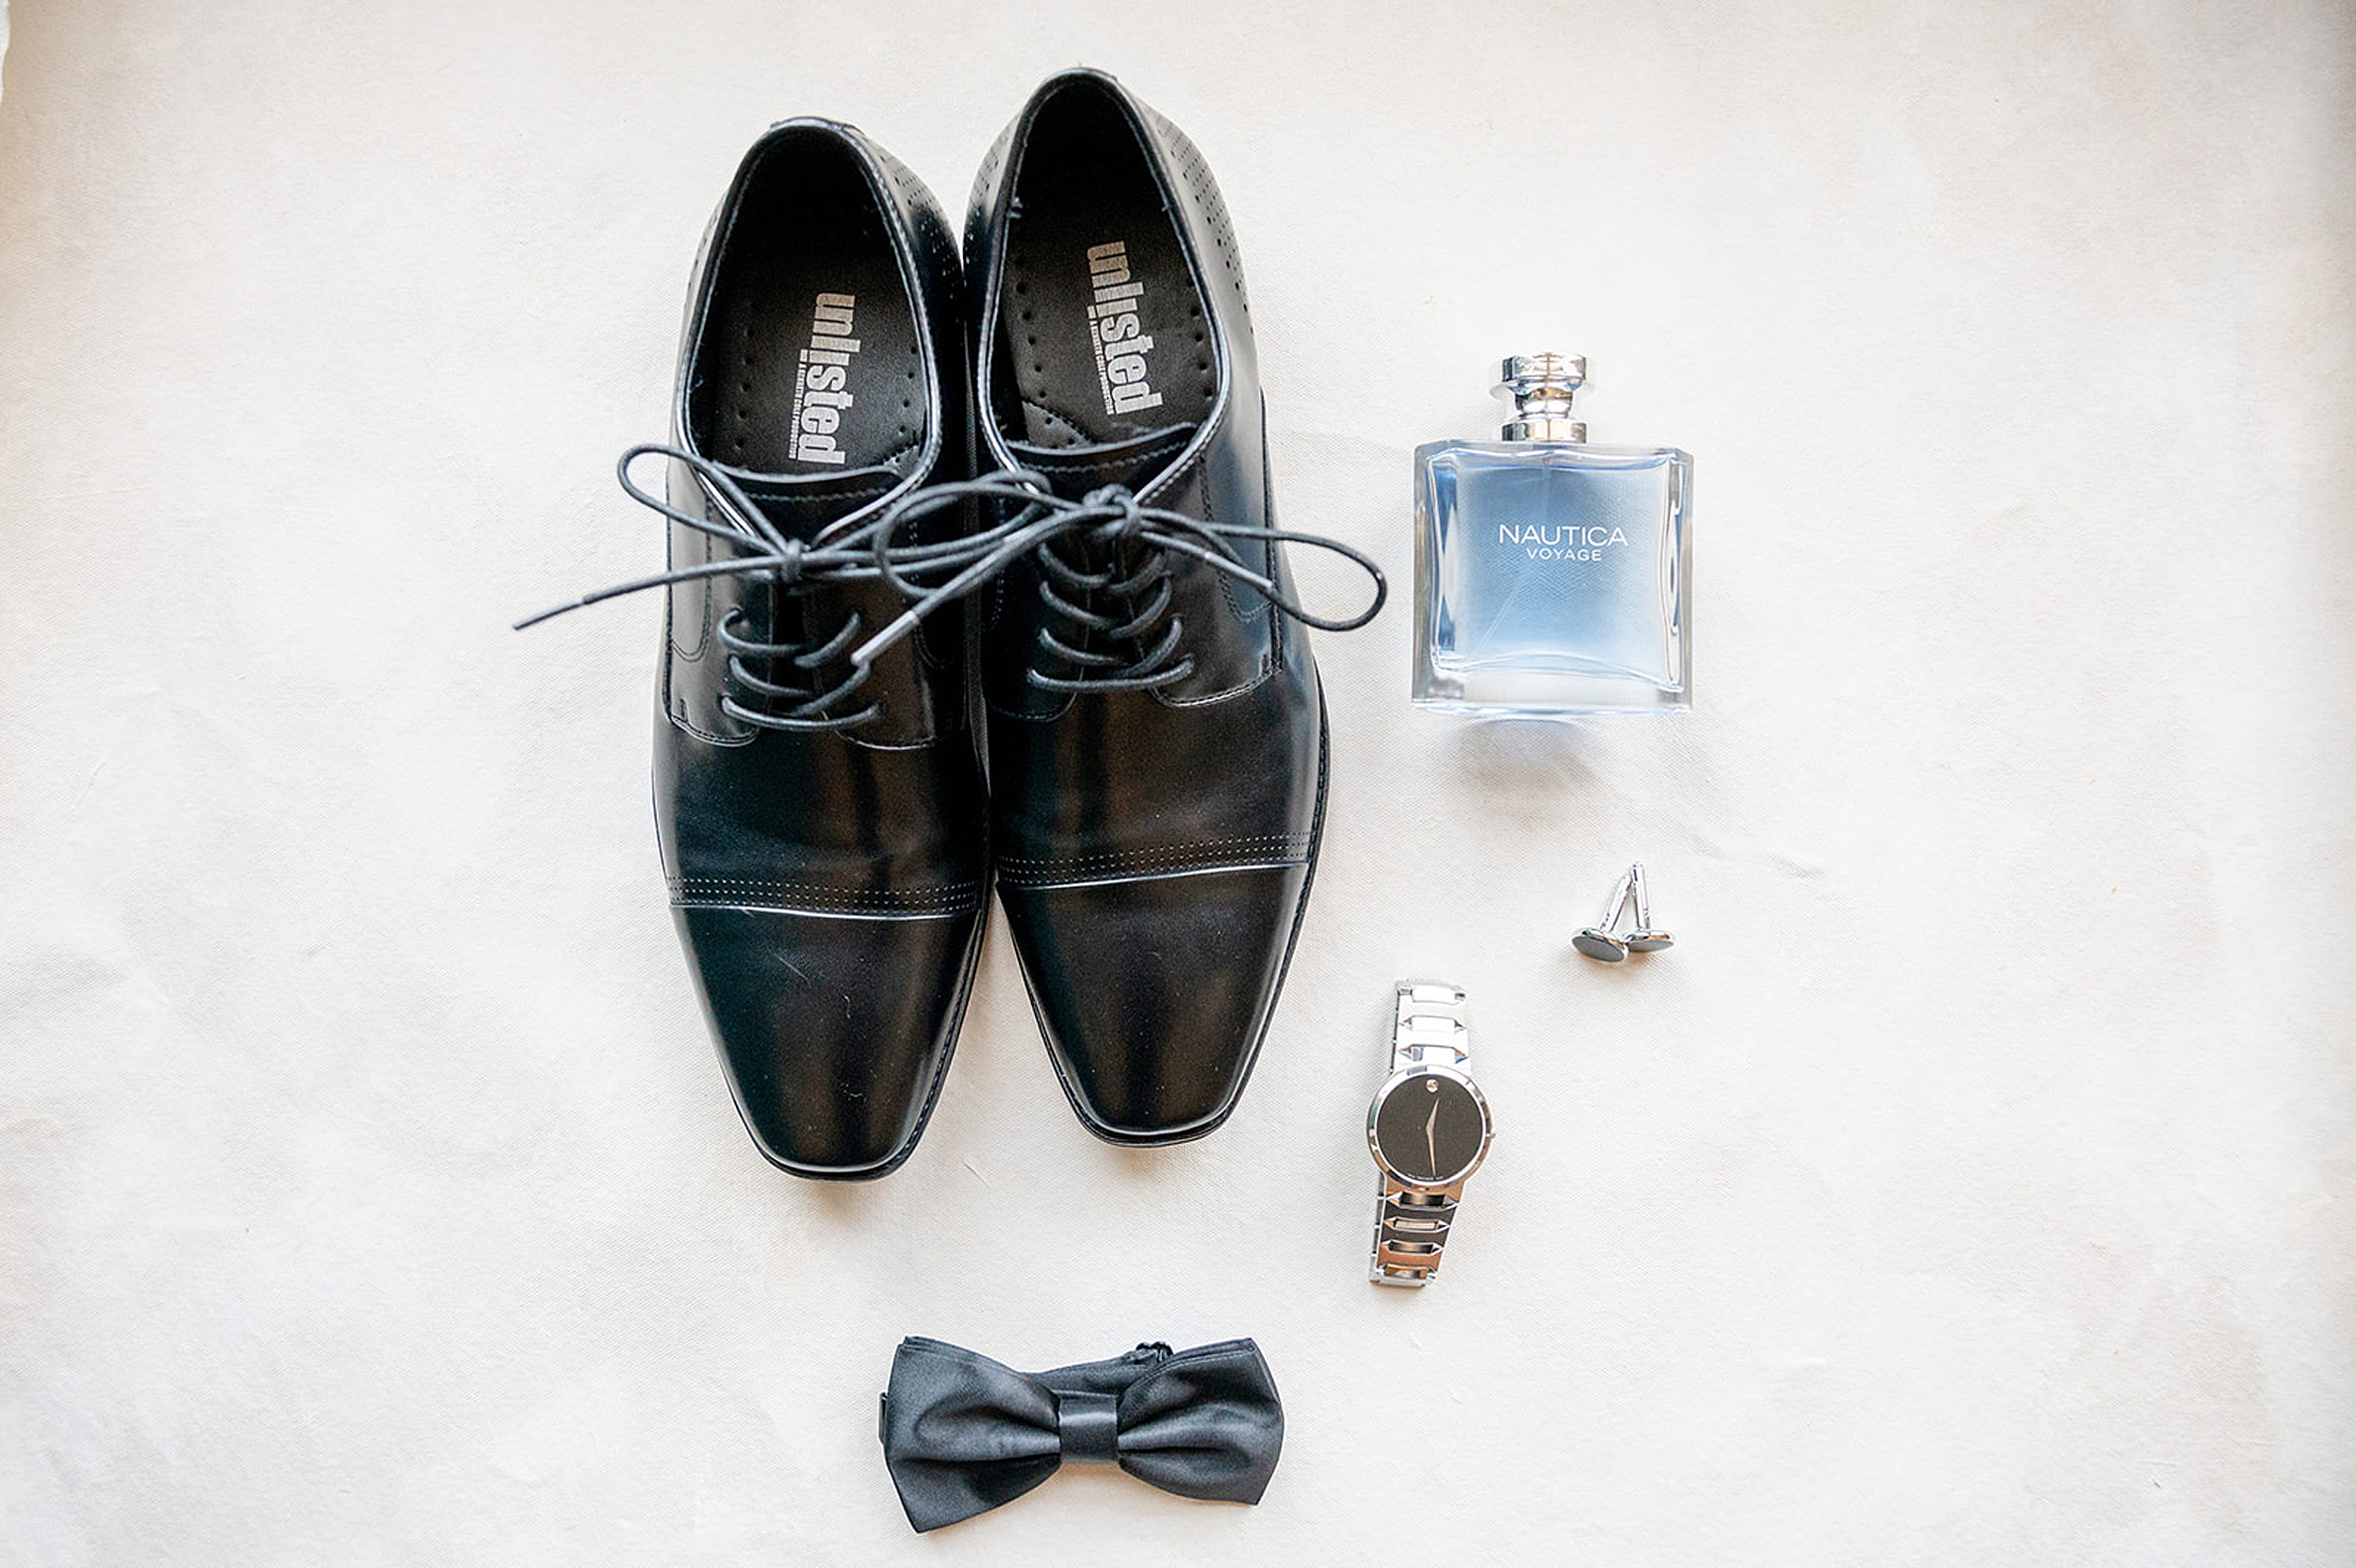 Details of a groom's effects for his wedding day